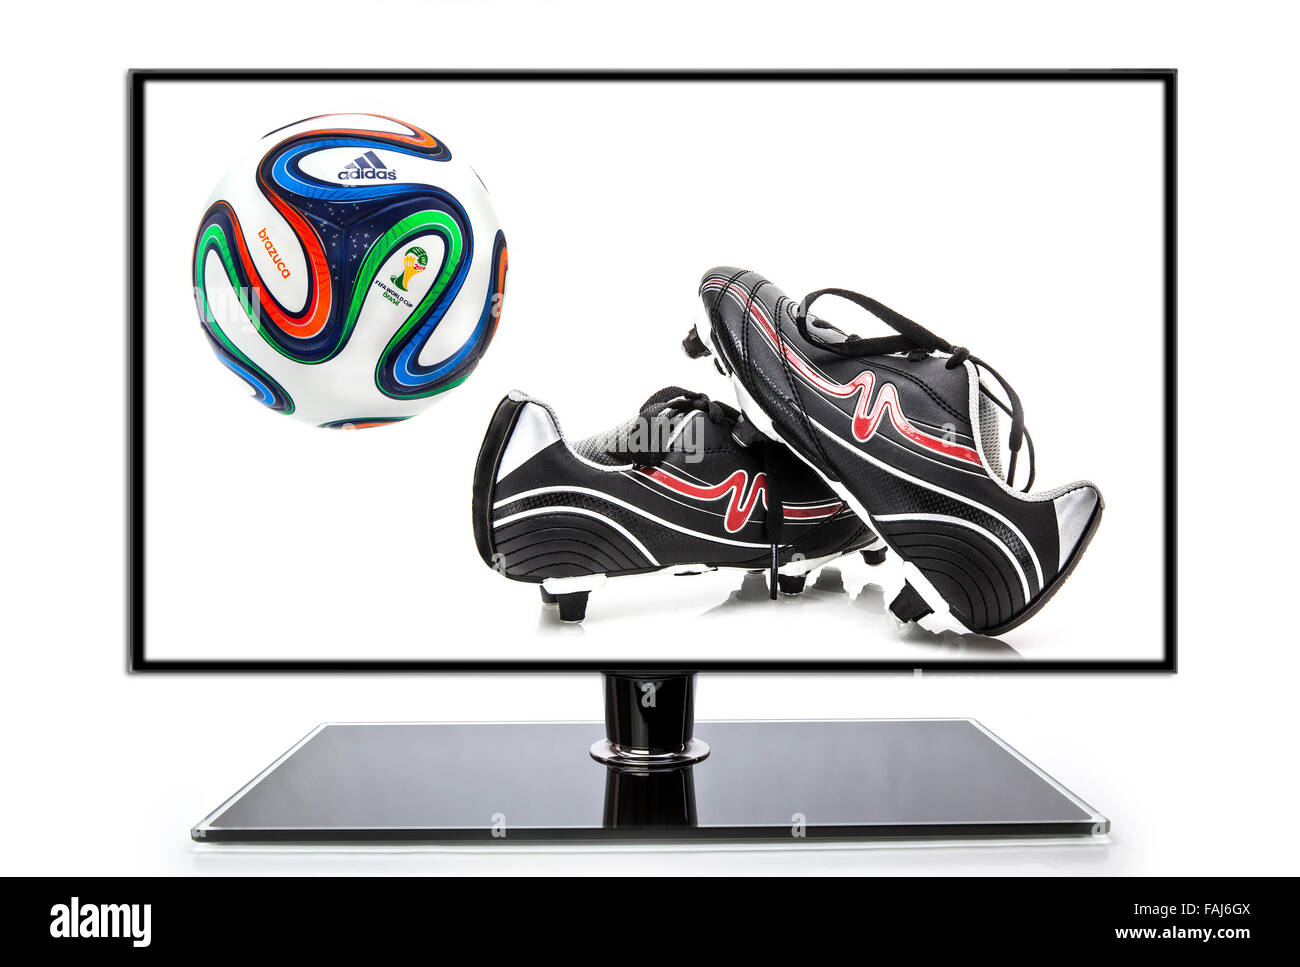 Adidas Brazuca World Cup 2014 Football, The Official Match ball for the 2014 World Cup with football Boots and TV Stock Photo